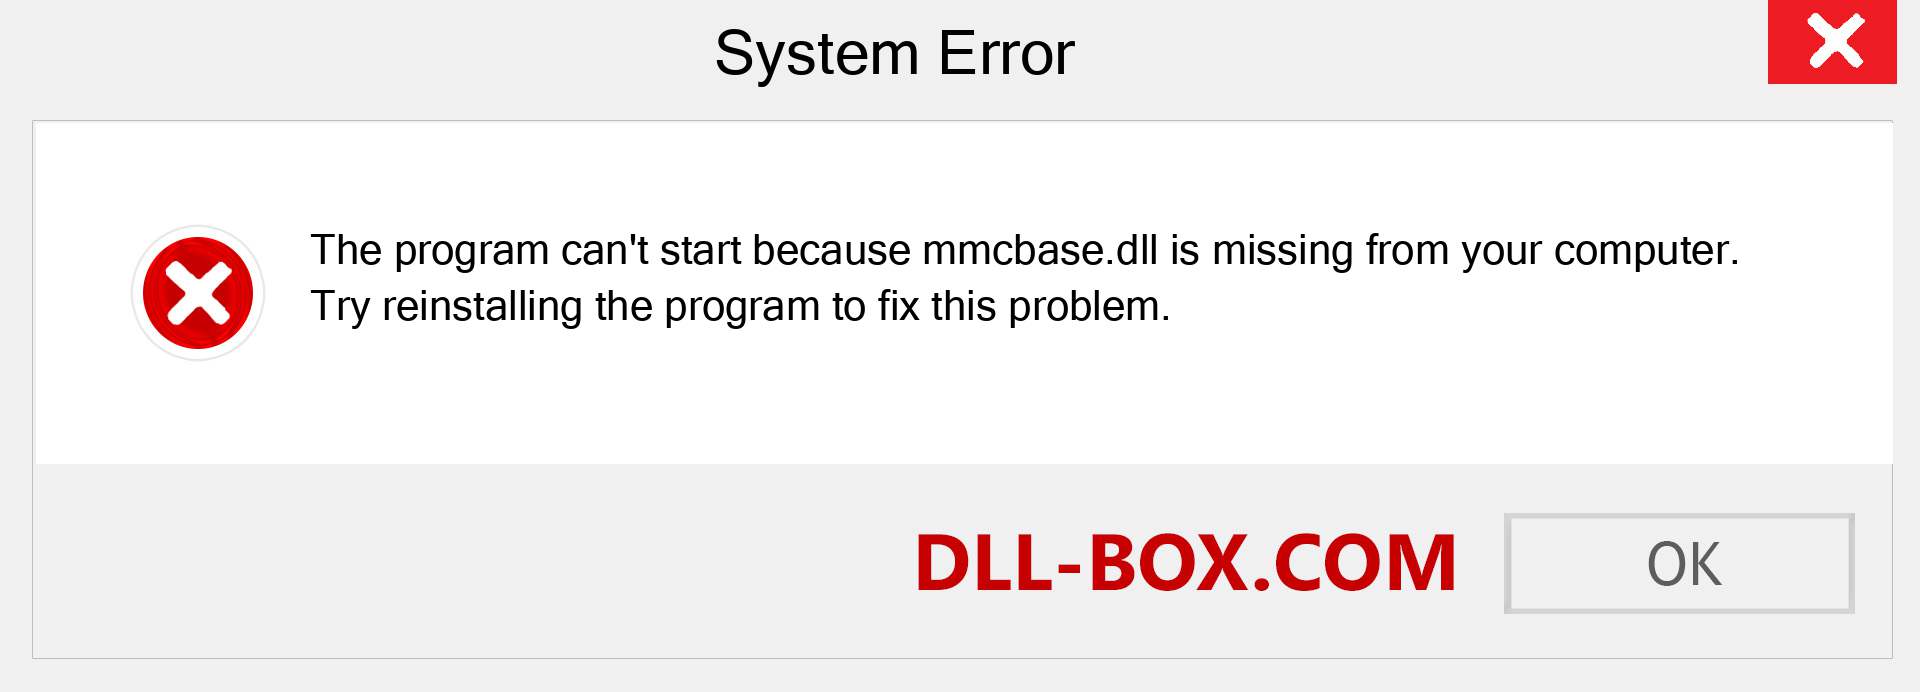  mmcbase.dll file is missing?. Download for Windows 7, 8, 10 - Fix  mmcbase dll Missing Error on Windows, photos, images